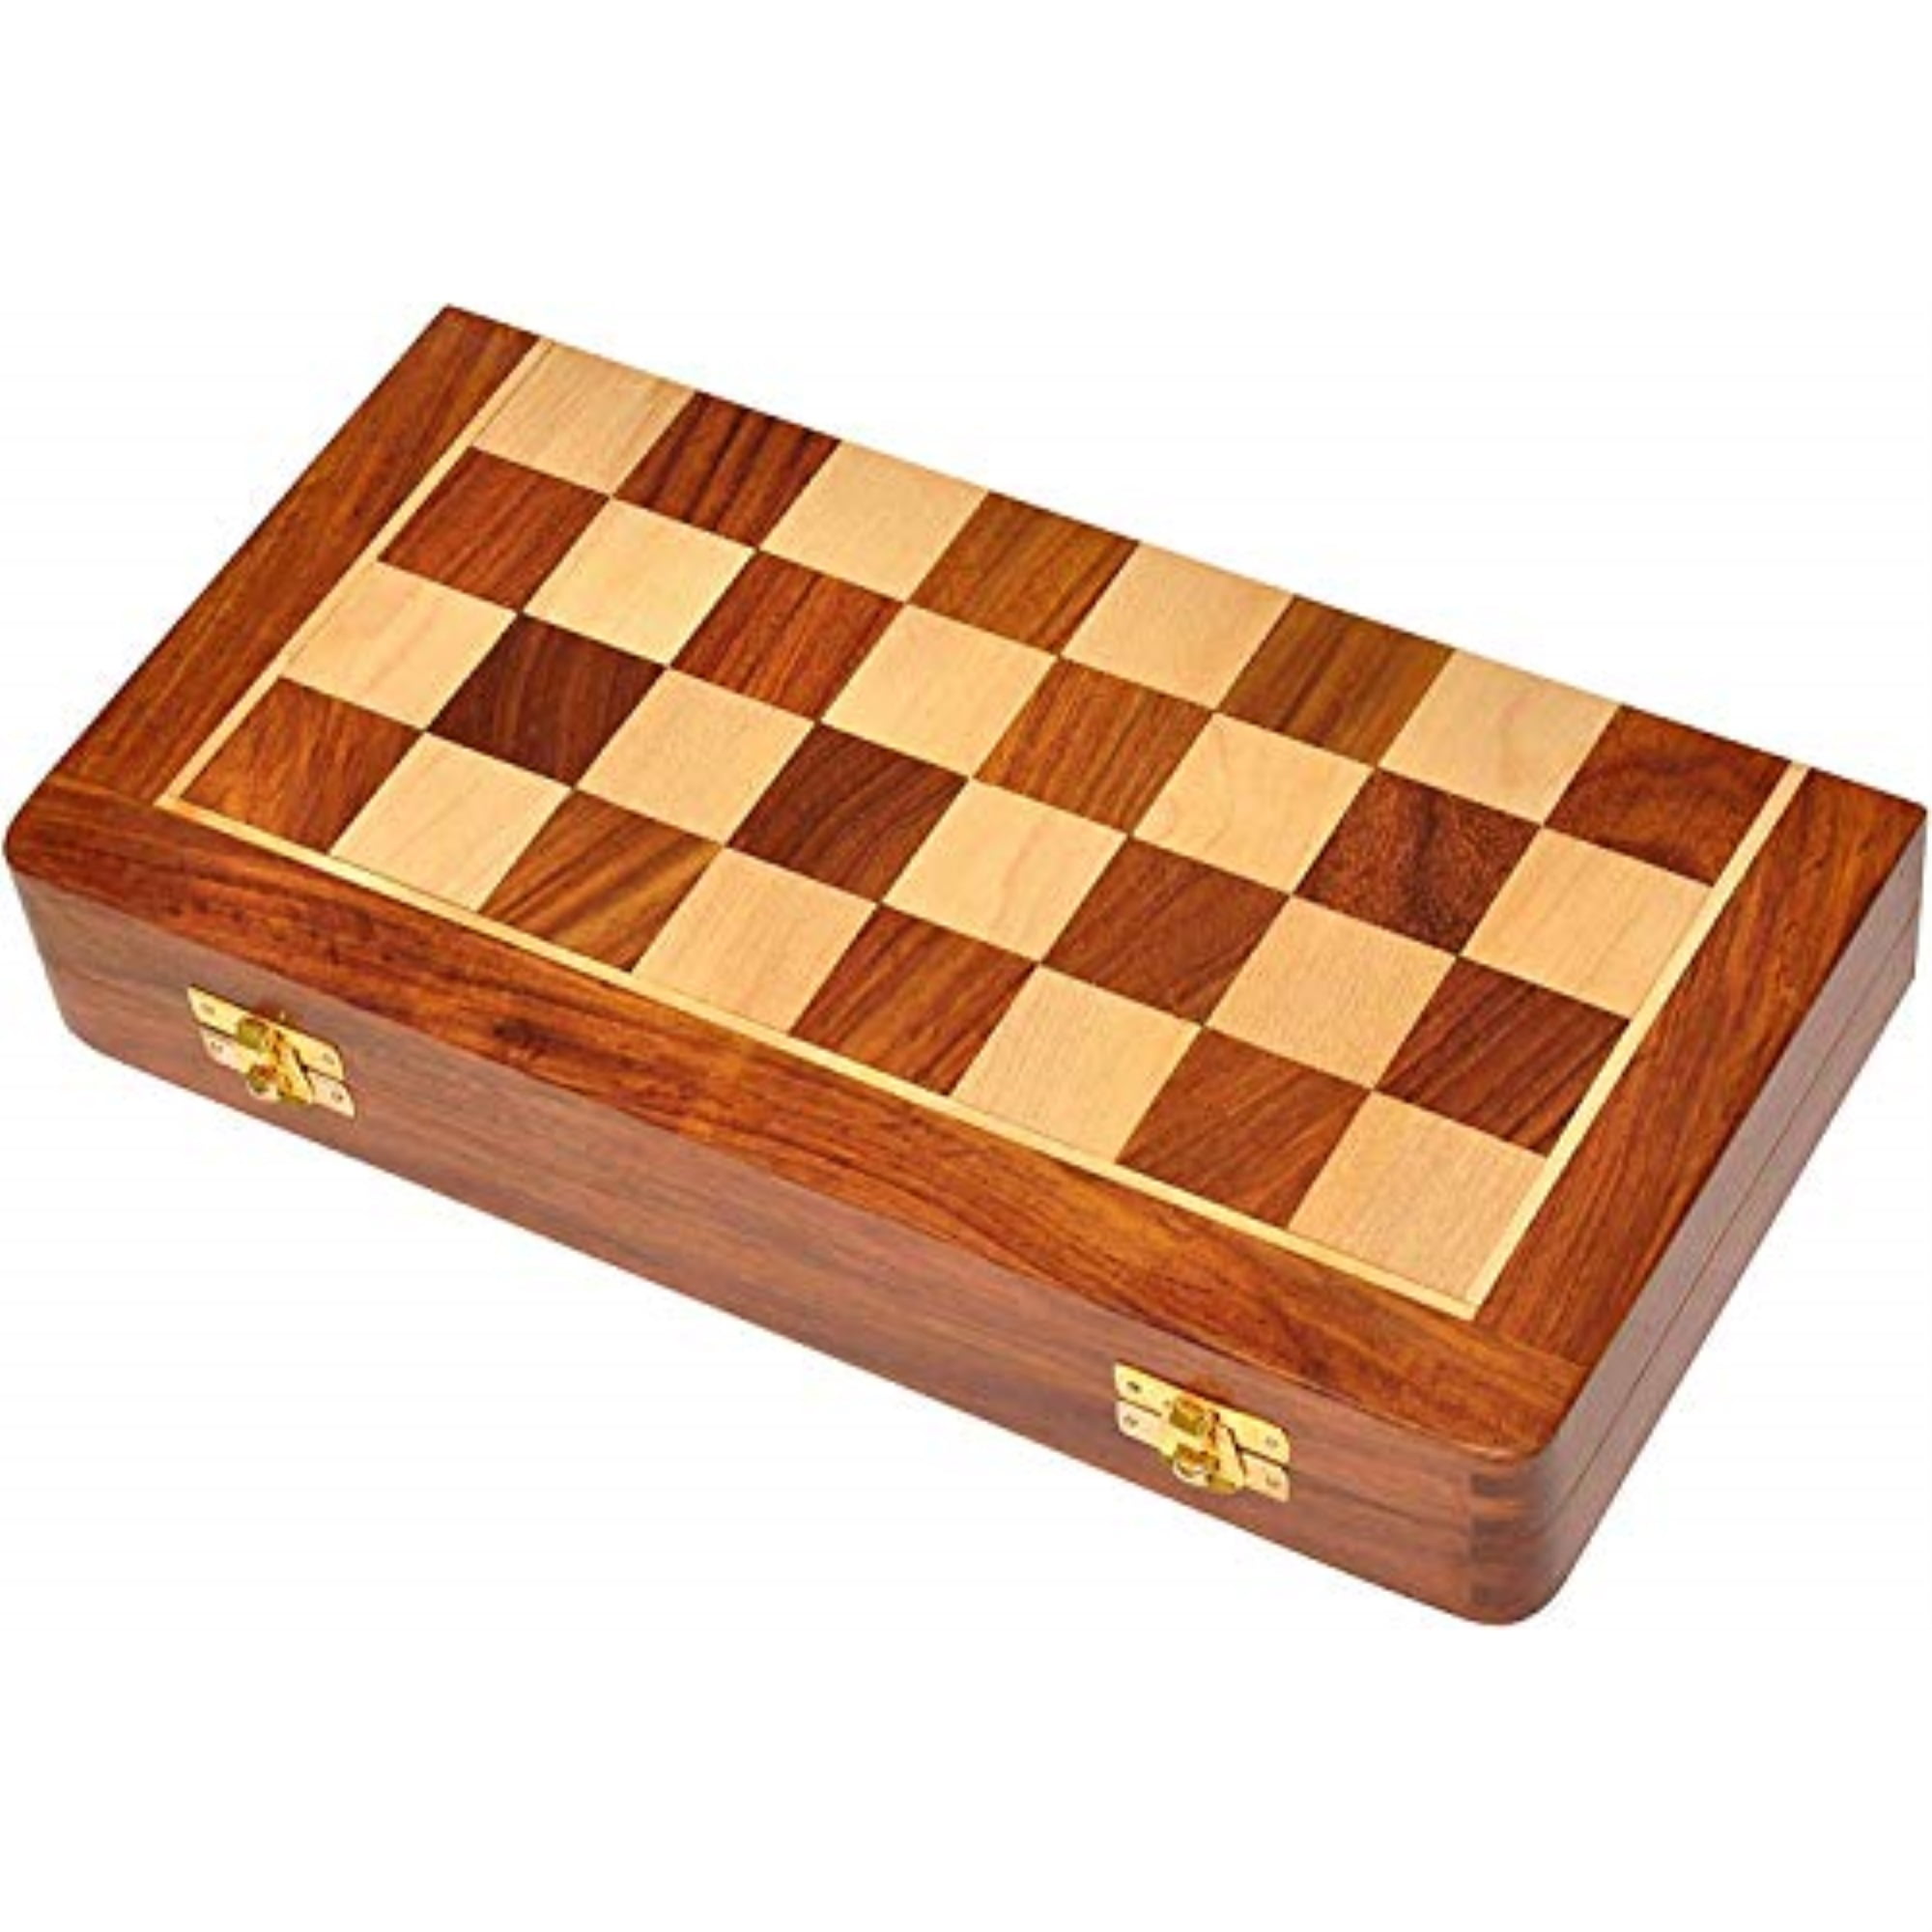 12" Portable Vintage Chess Set Wood Style Board Magnetic Pieces Folding Game 